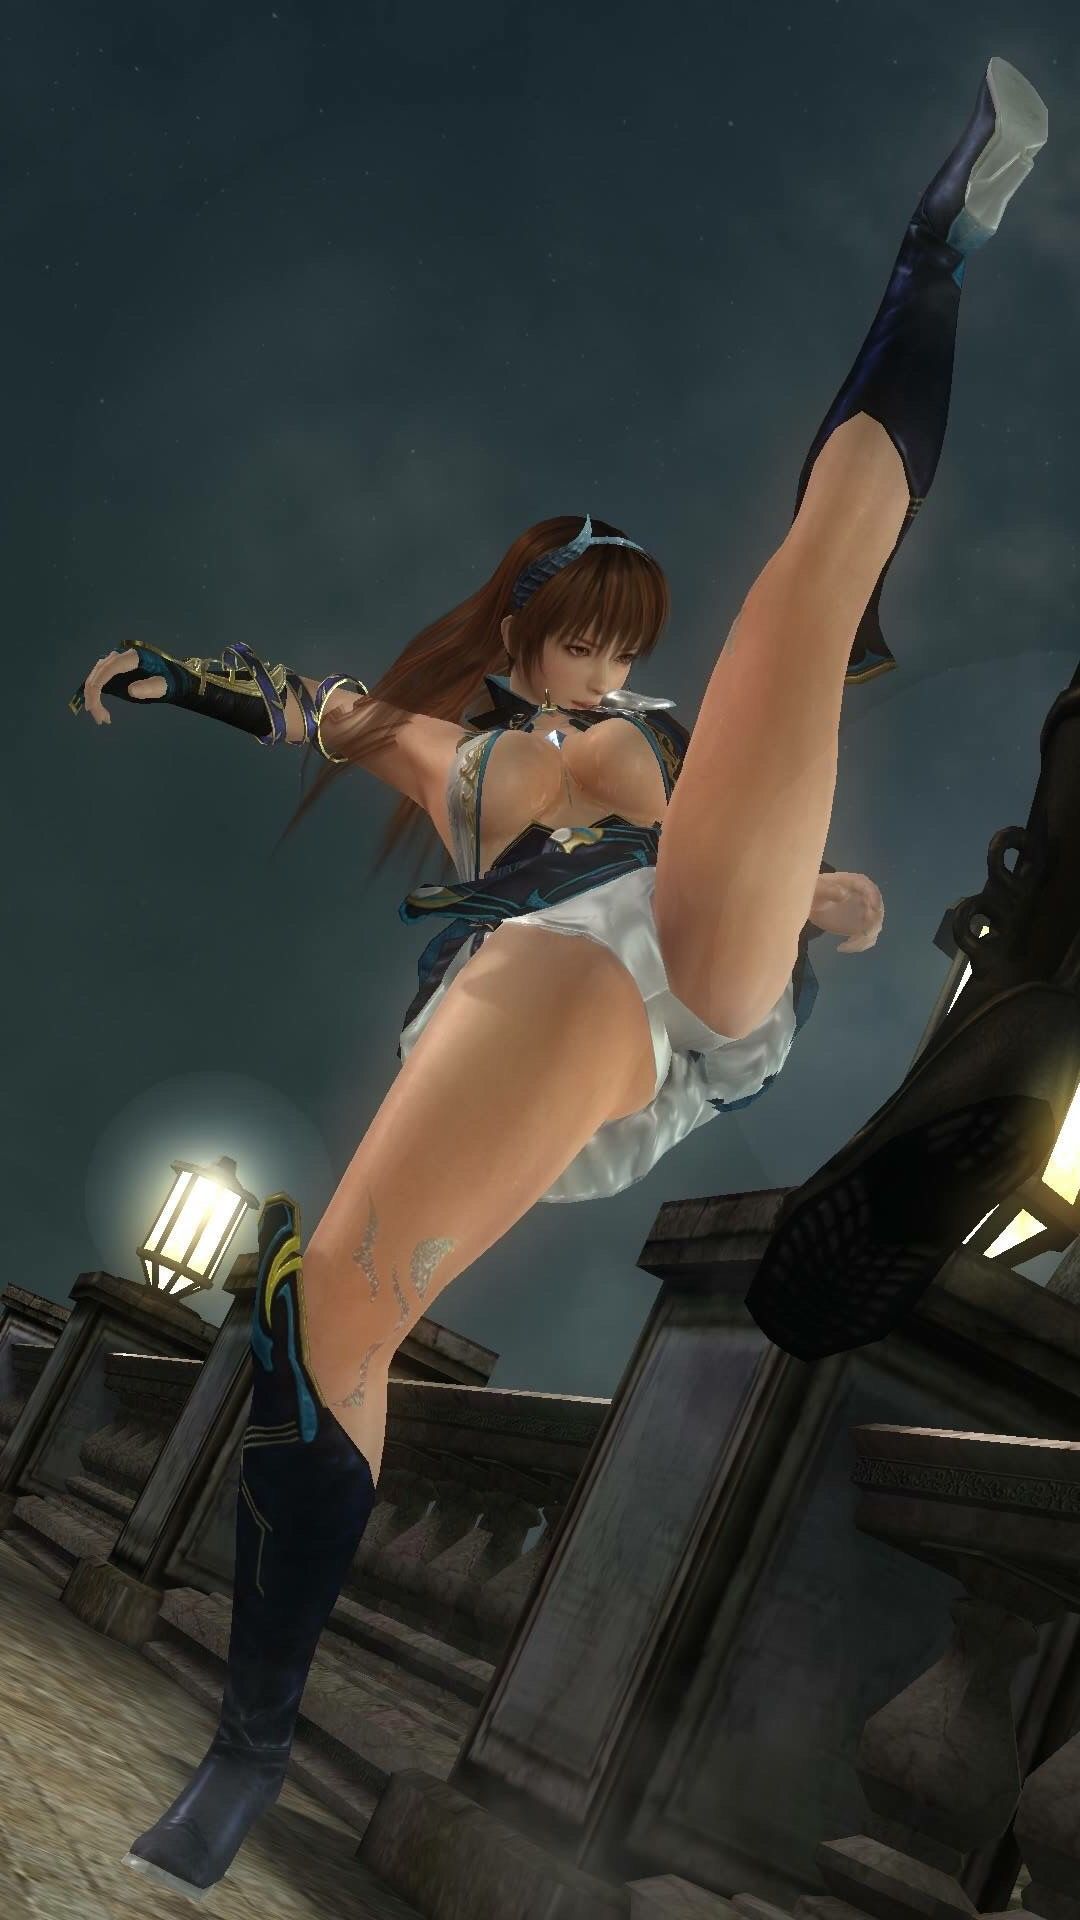 [Image] the female characters appearing in the game somehow why whole erotic or doing body with wwwwww 3